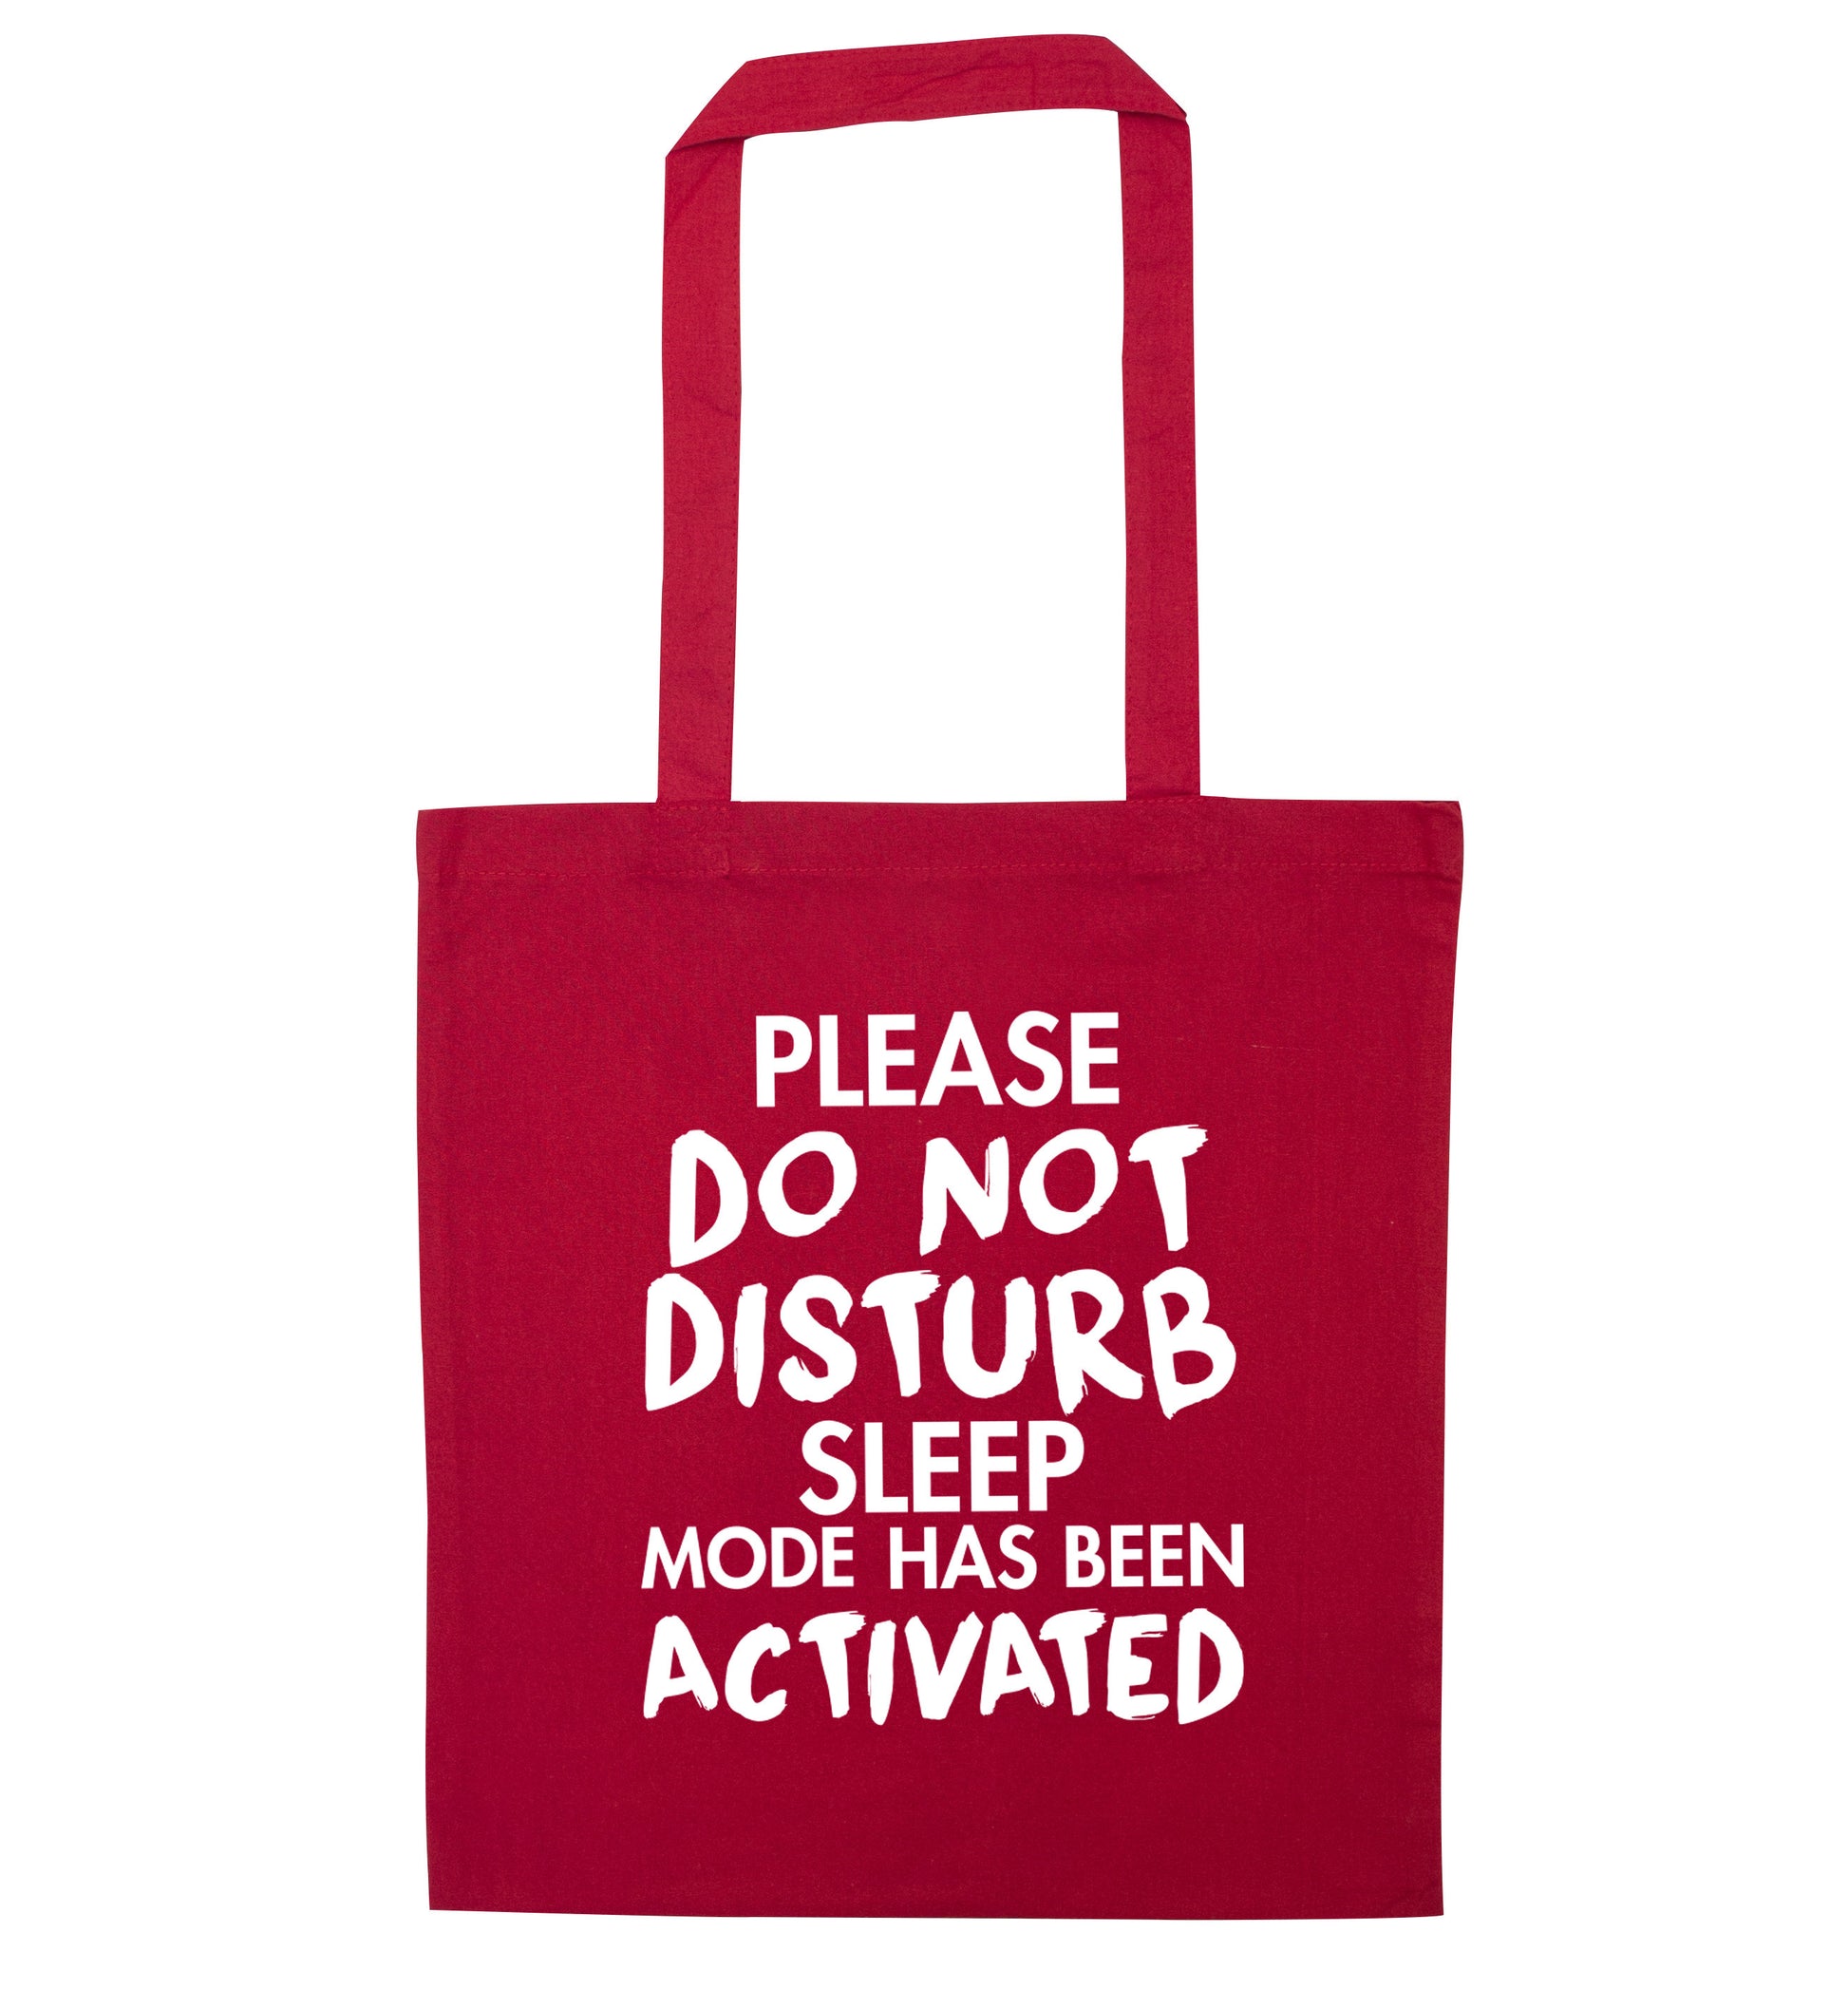 Please do not disturb sleeping mode has been activated red tote bag